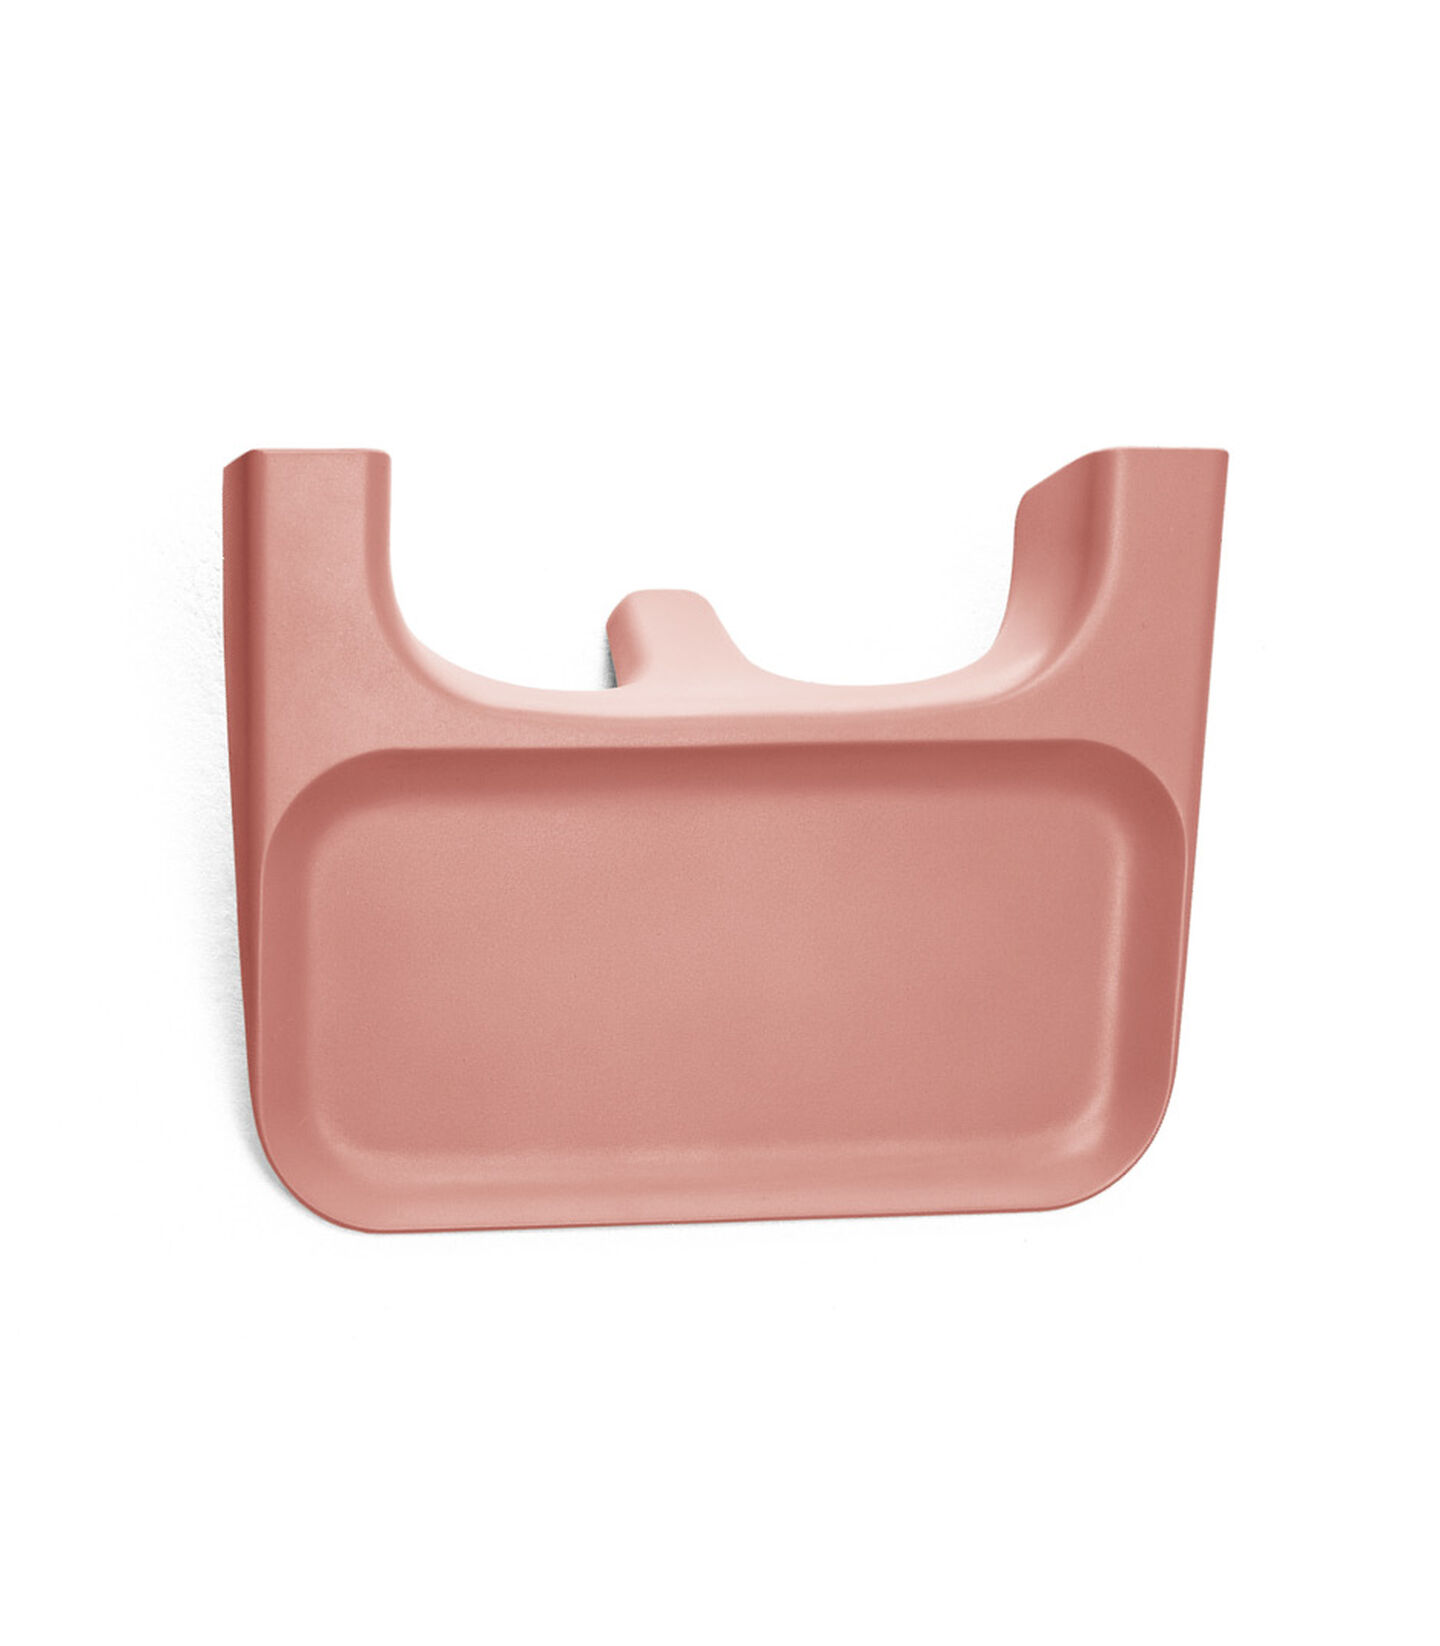 Stokke® Clikk™ Tray in Sunny Coral. Available as Spare part. view 1